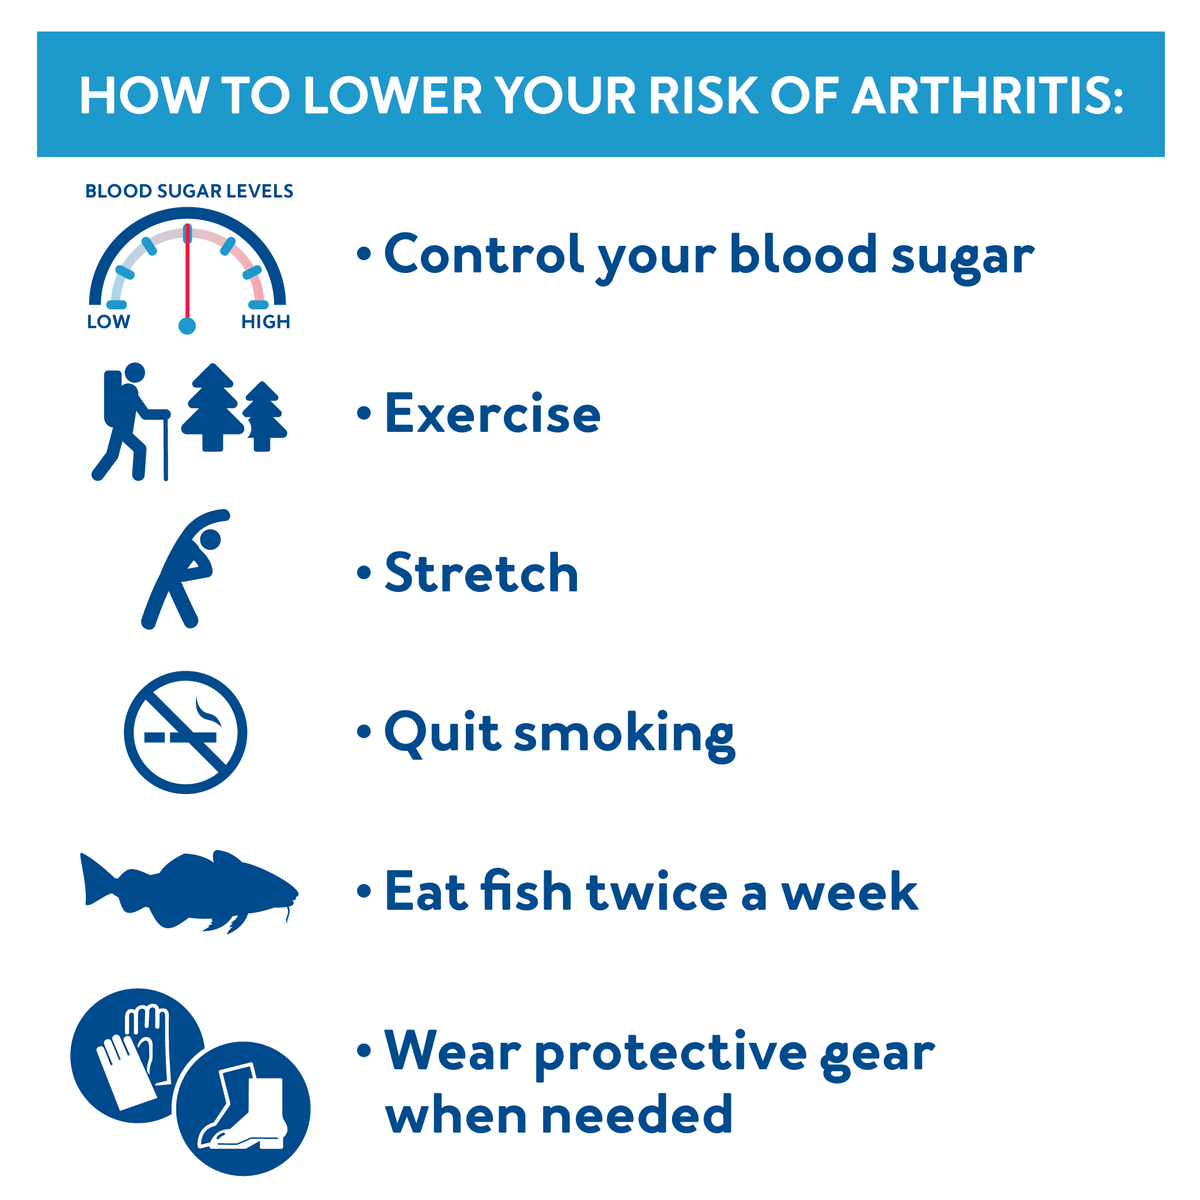 How to Lower Your Risk of Arthritis